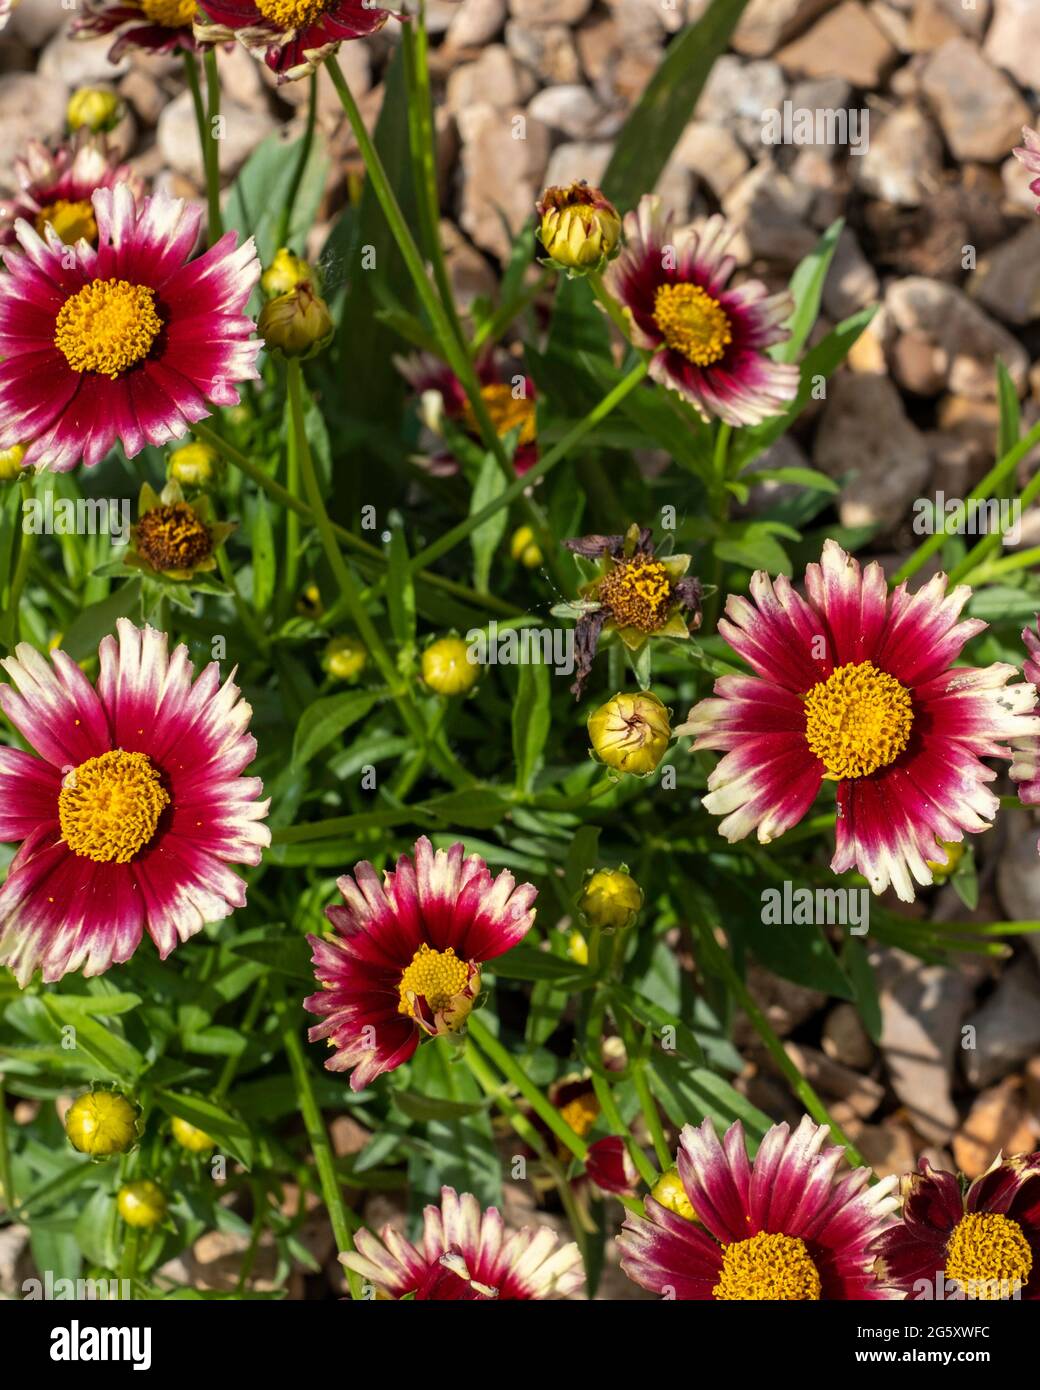 Leading Lady 'Iron Lady' Coreopsis, a cultivar planted in a garden bed with rock mulch. Kansas, USA. Stock Photo